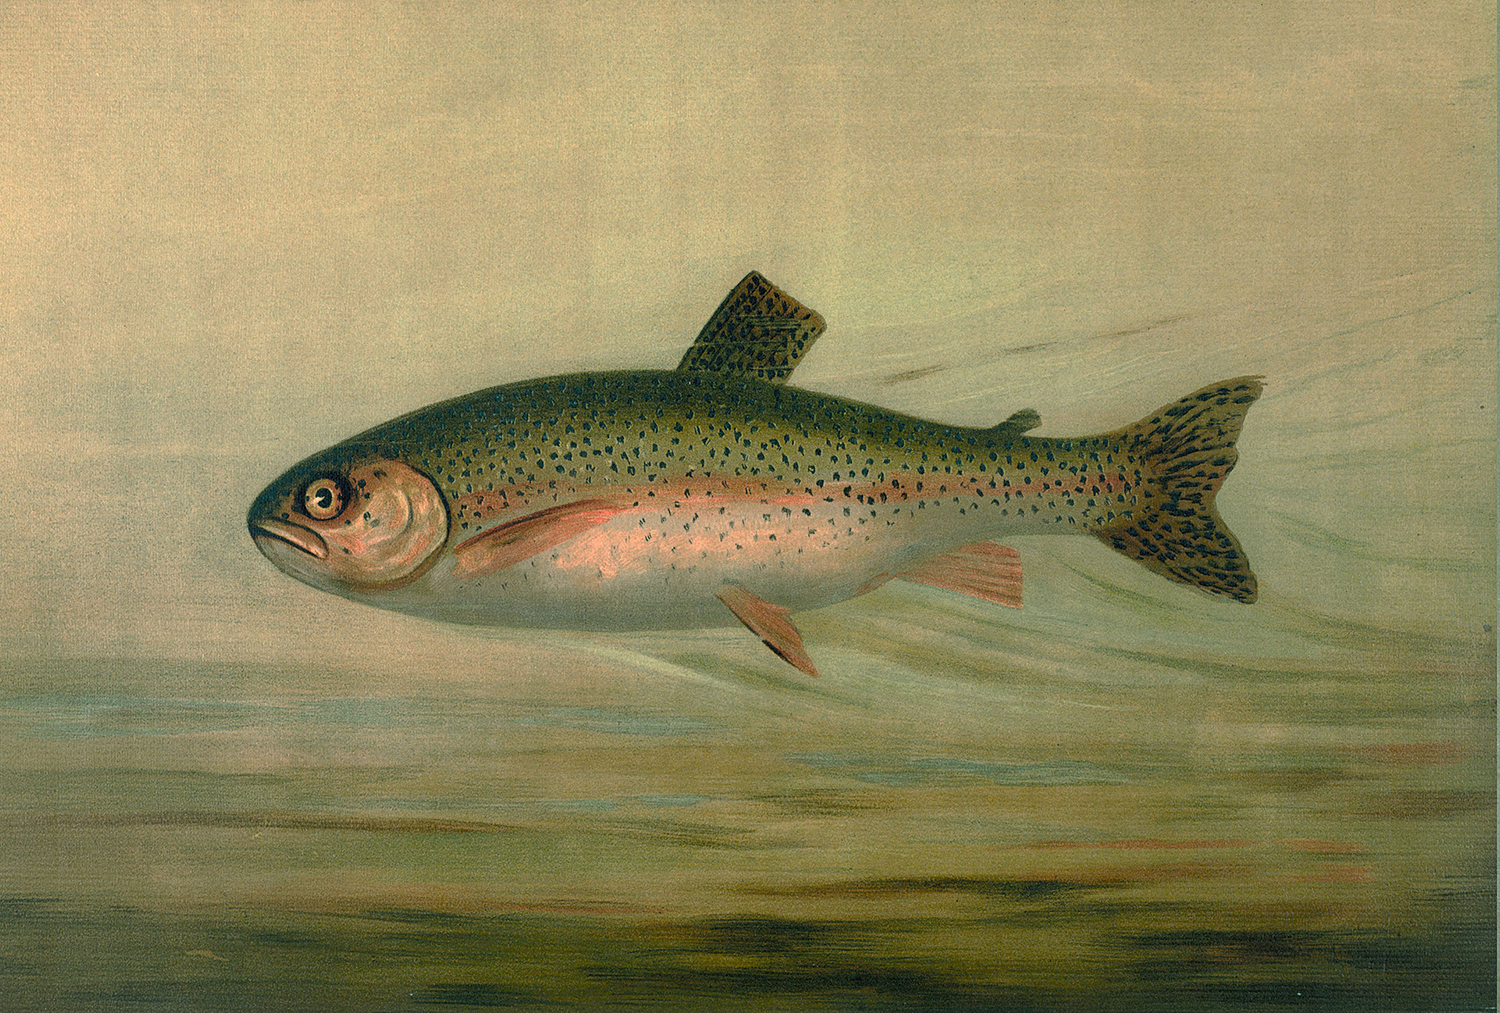 Cabin/Lodge Lodge Rainbow Trout Reproduction Print, Framed Behind Glass